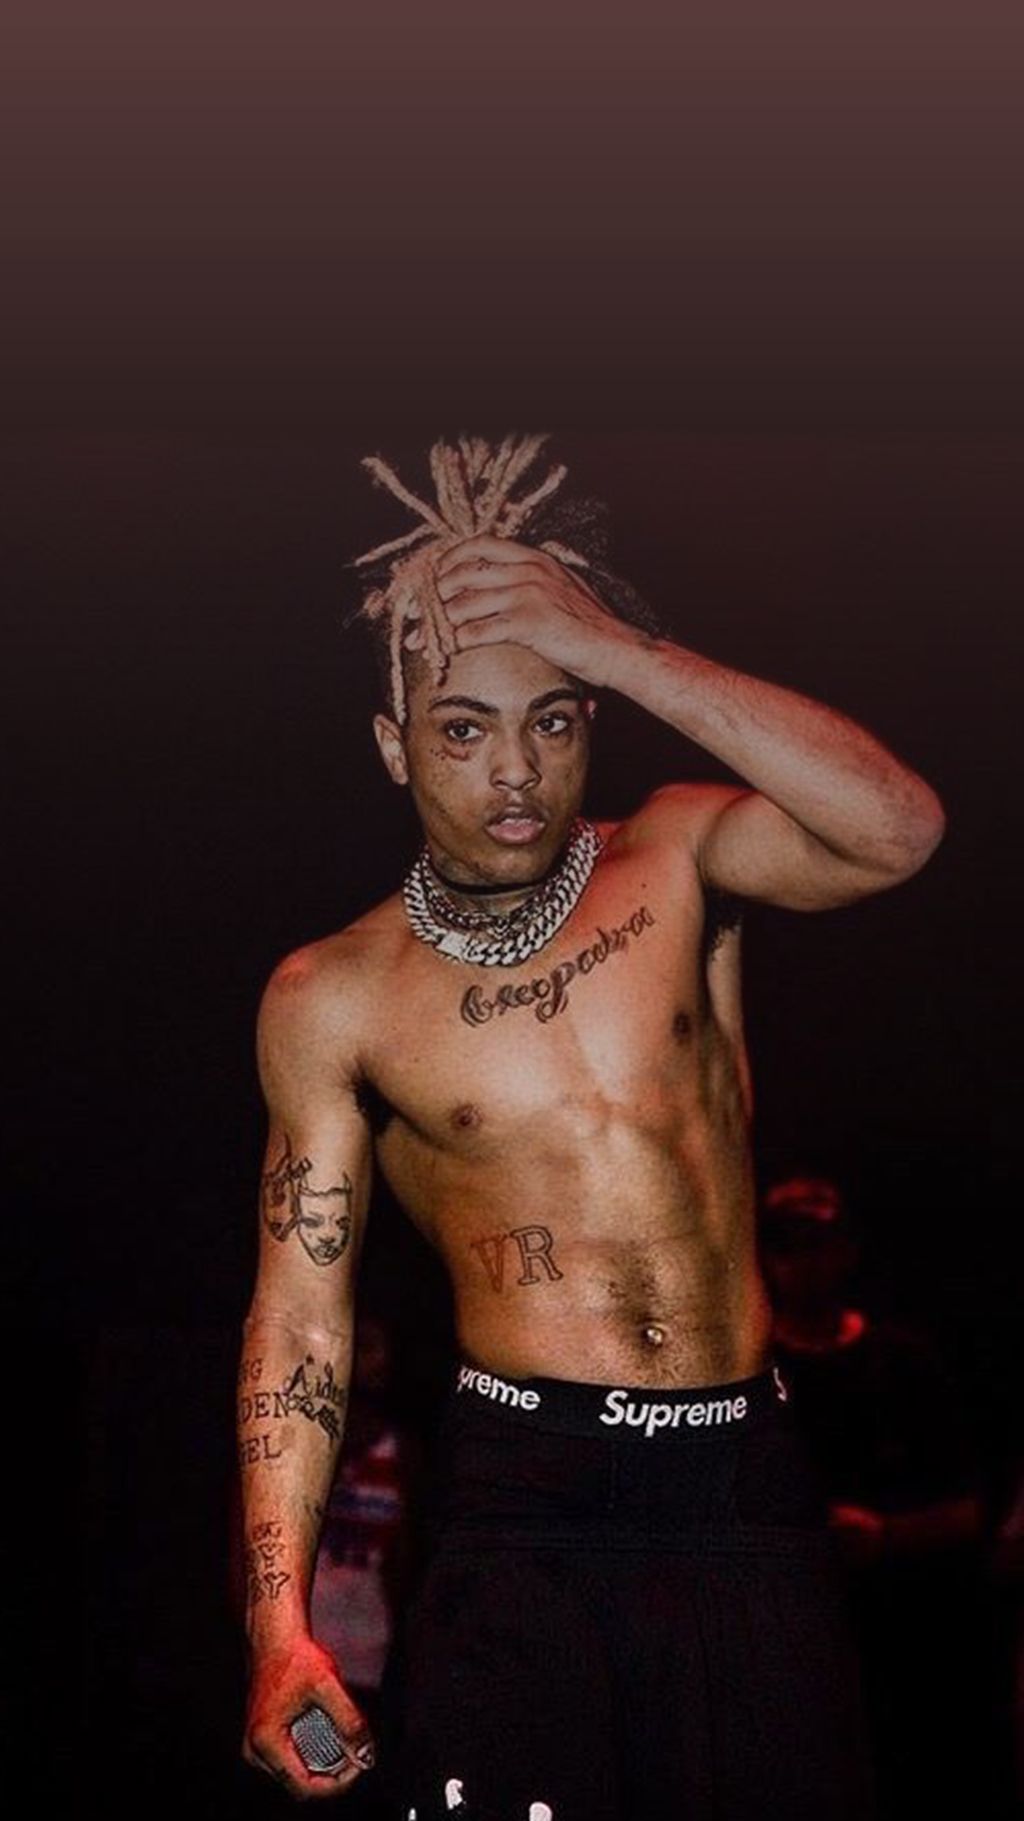 Xxxtentacion Wallpapers Iphone posted by Christopher Sellers.